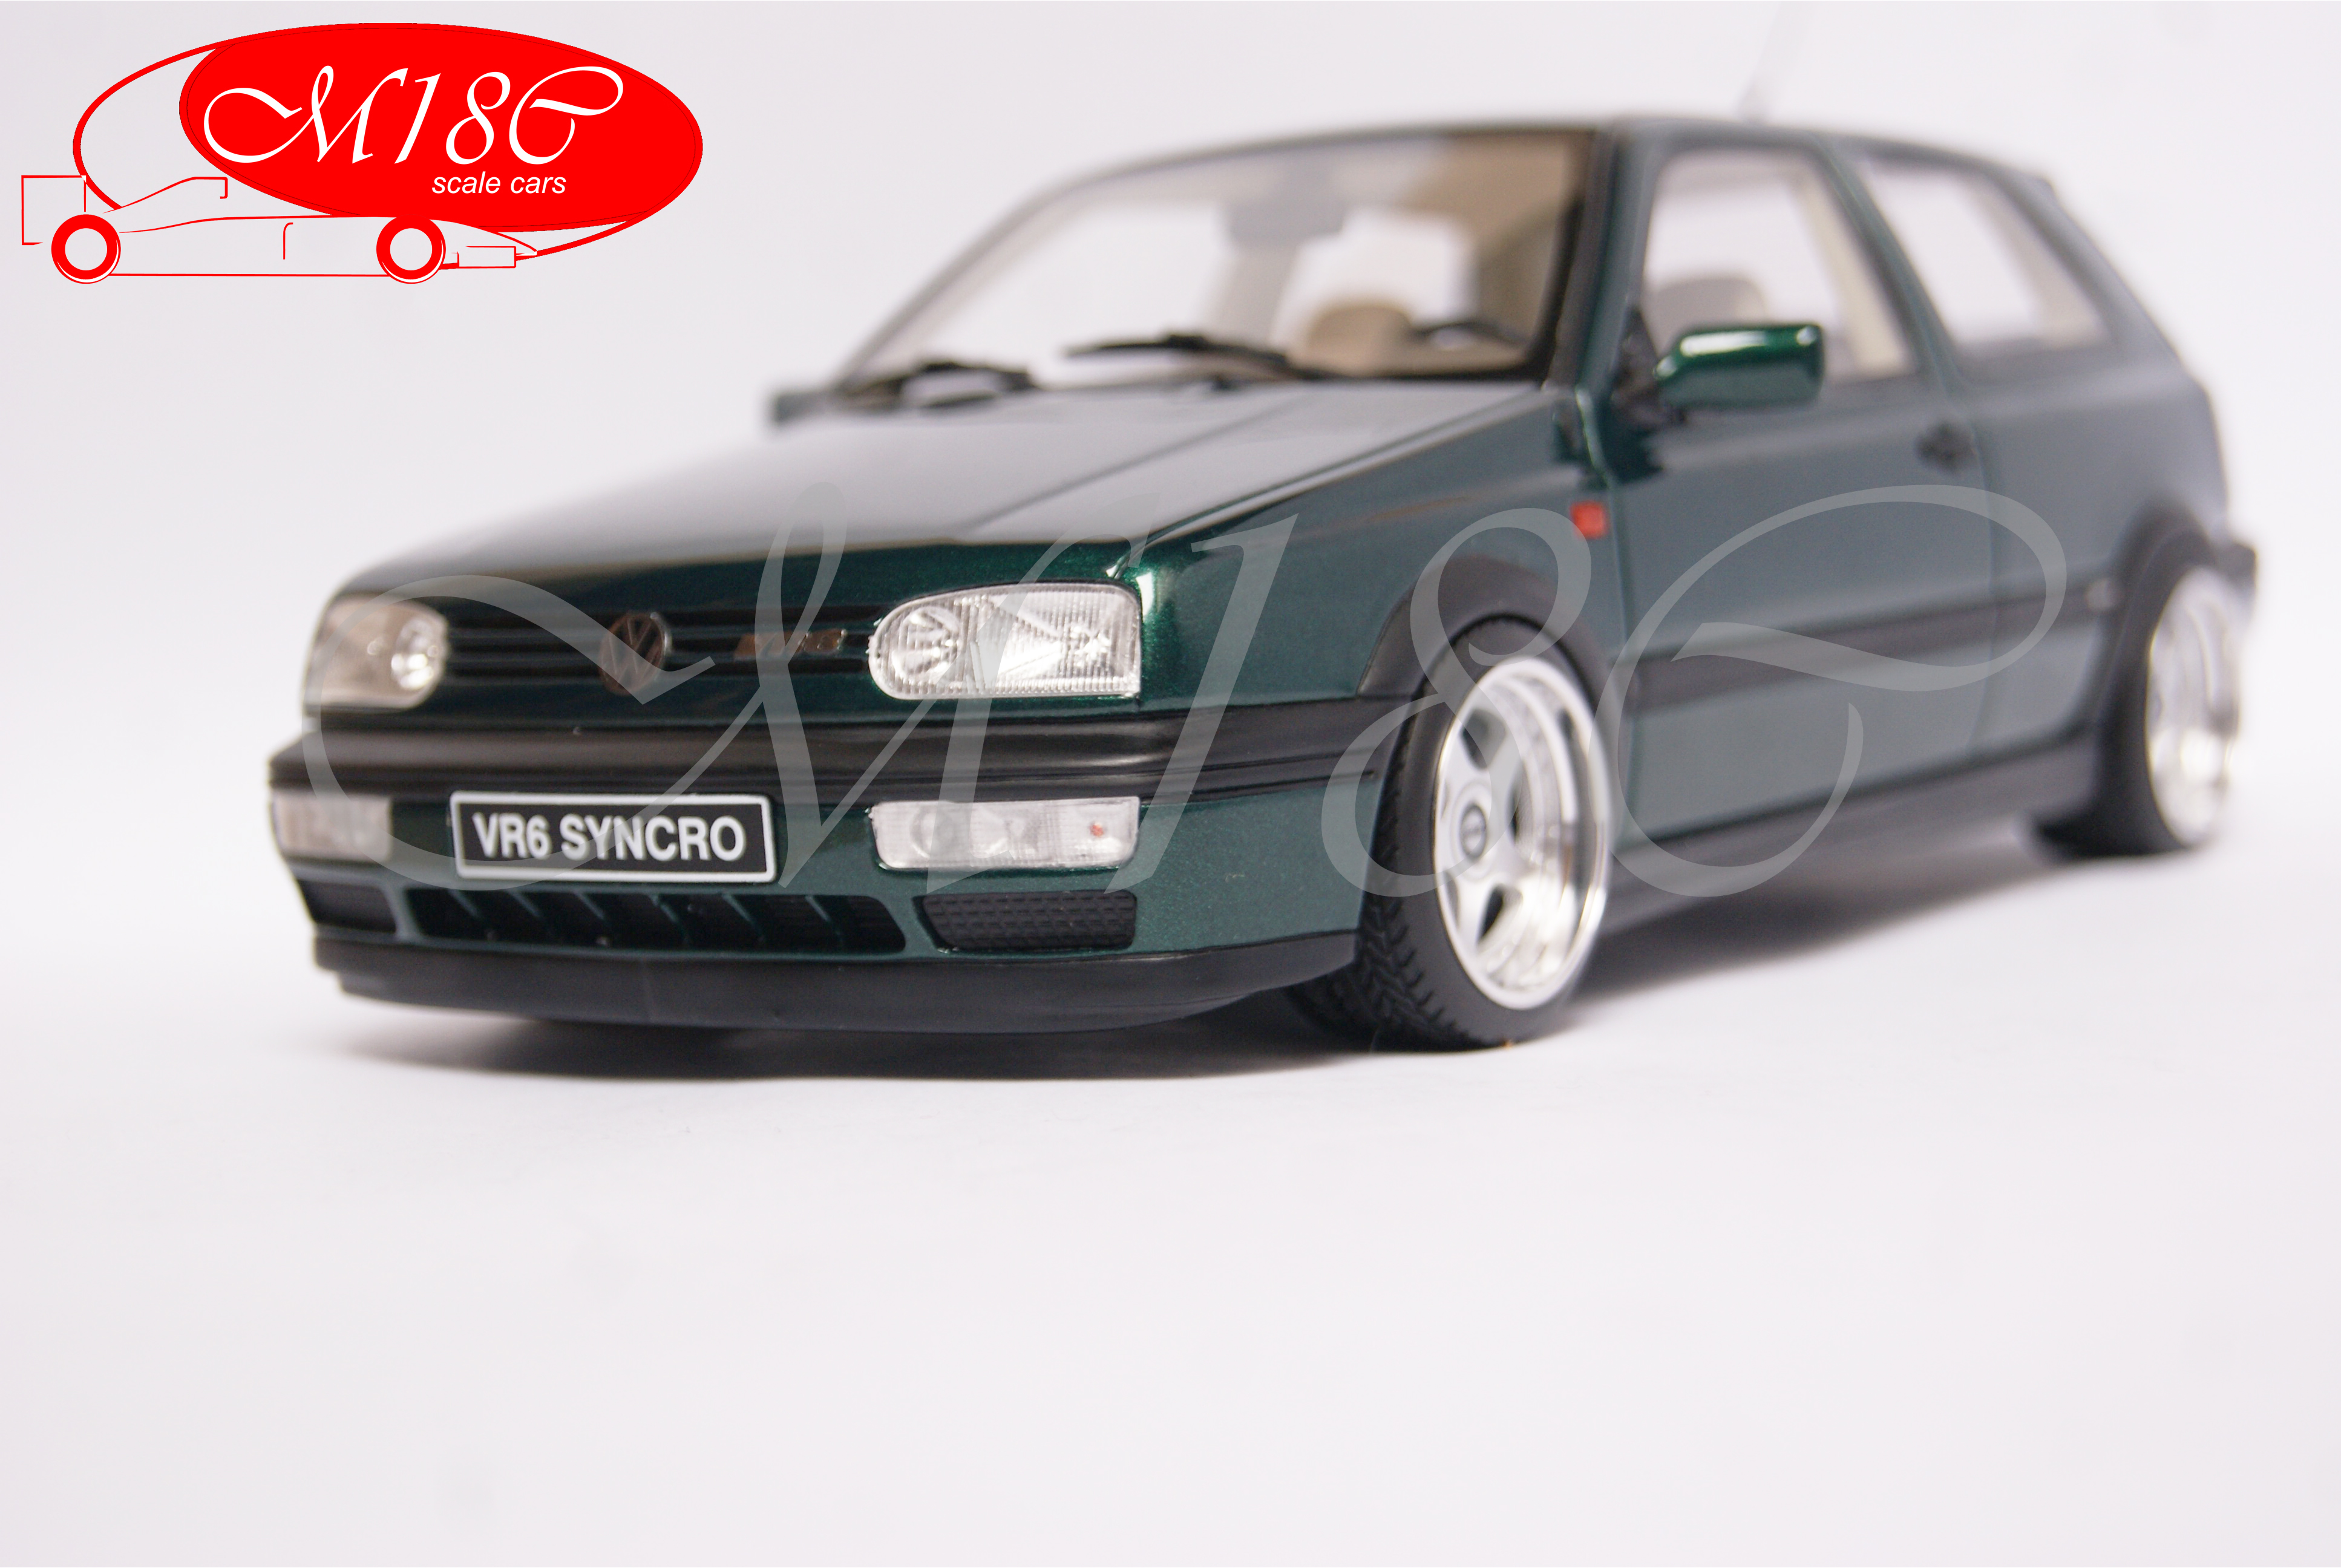 Volkswagen Golf III 1/18 Ottomobile VR6 synchro grun jantes OZ Racing 17 pouces tuning diecast model cars